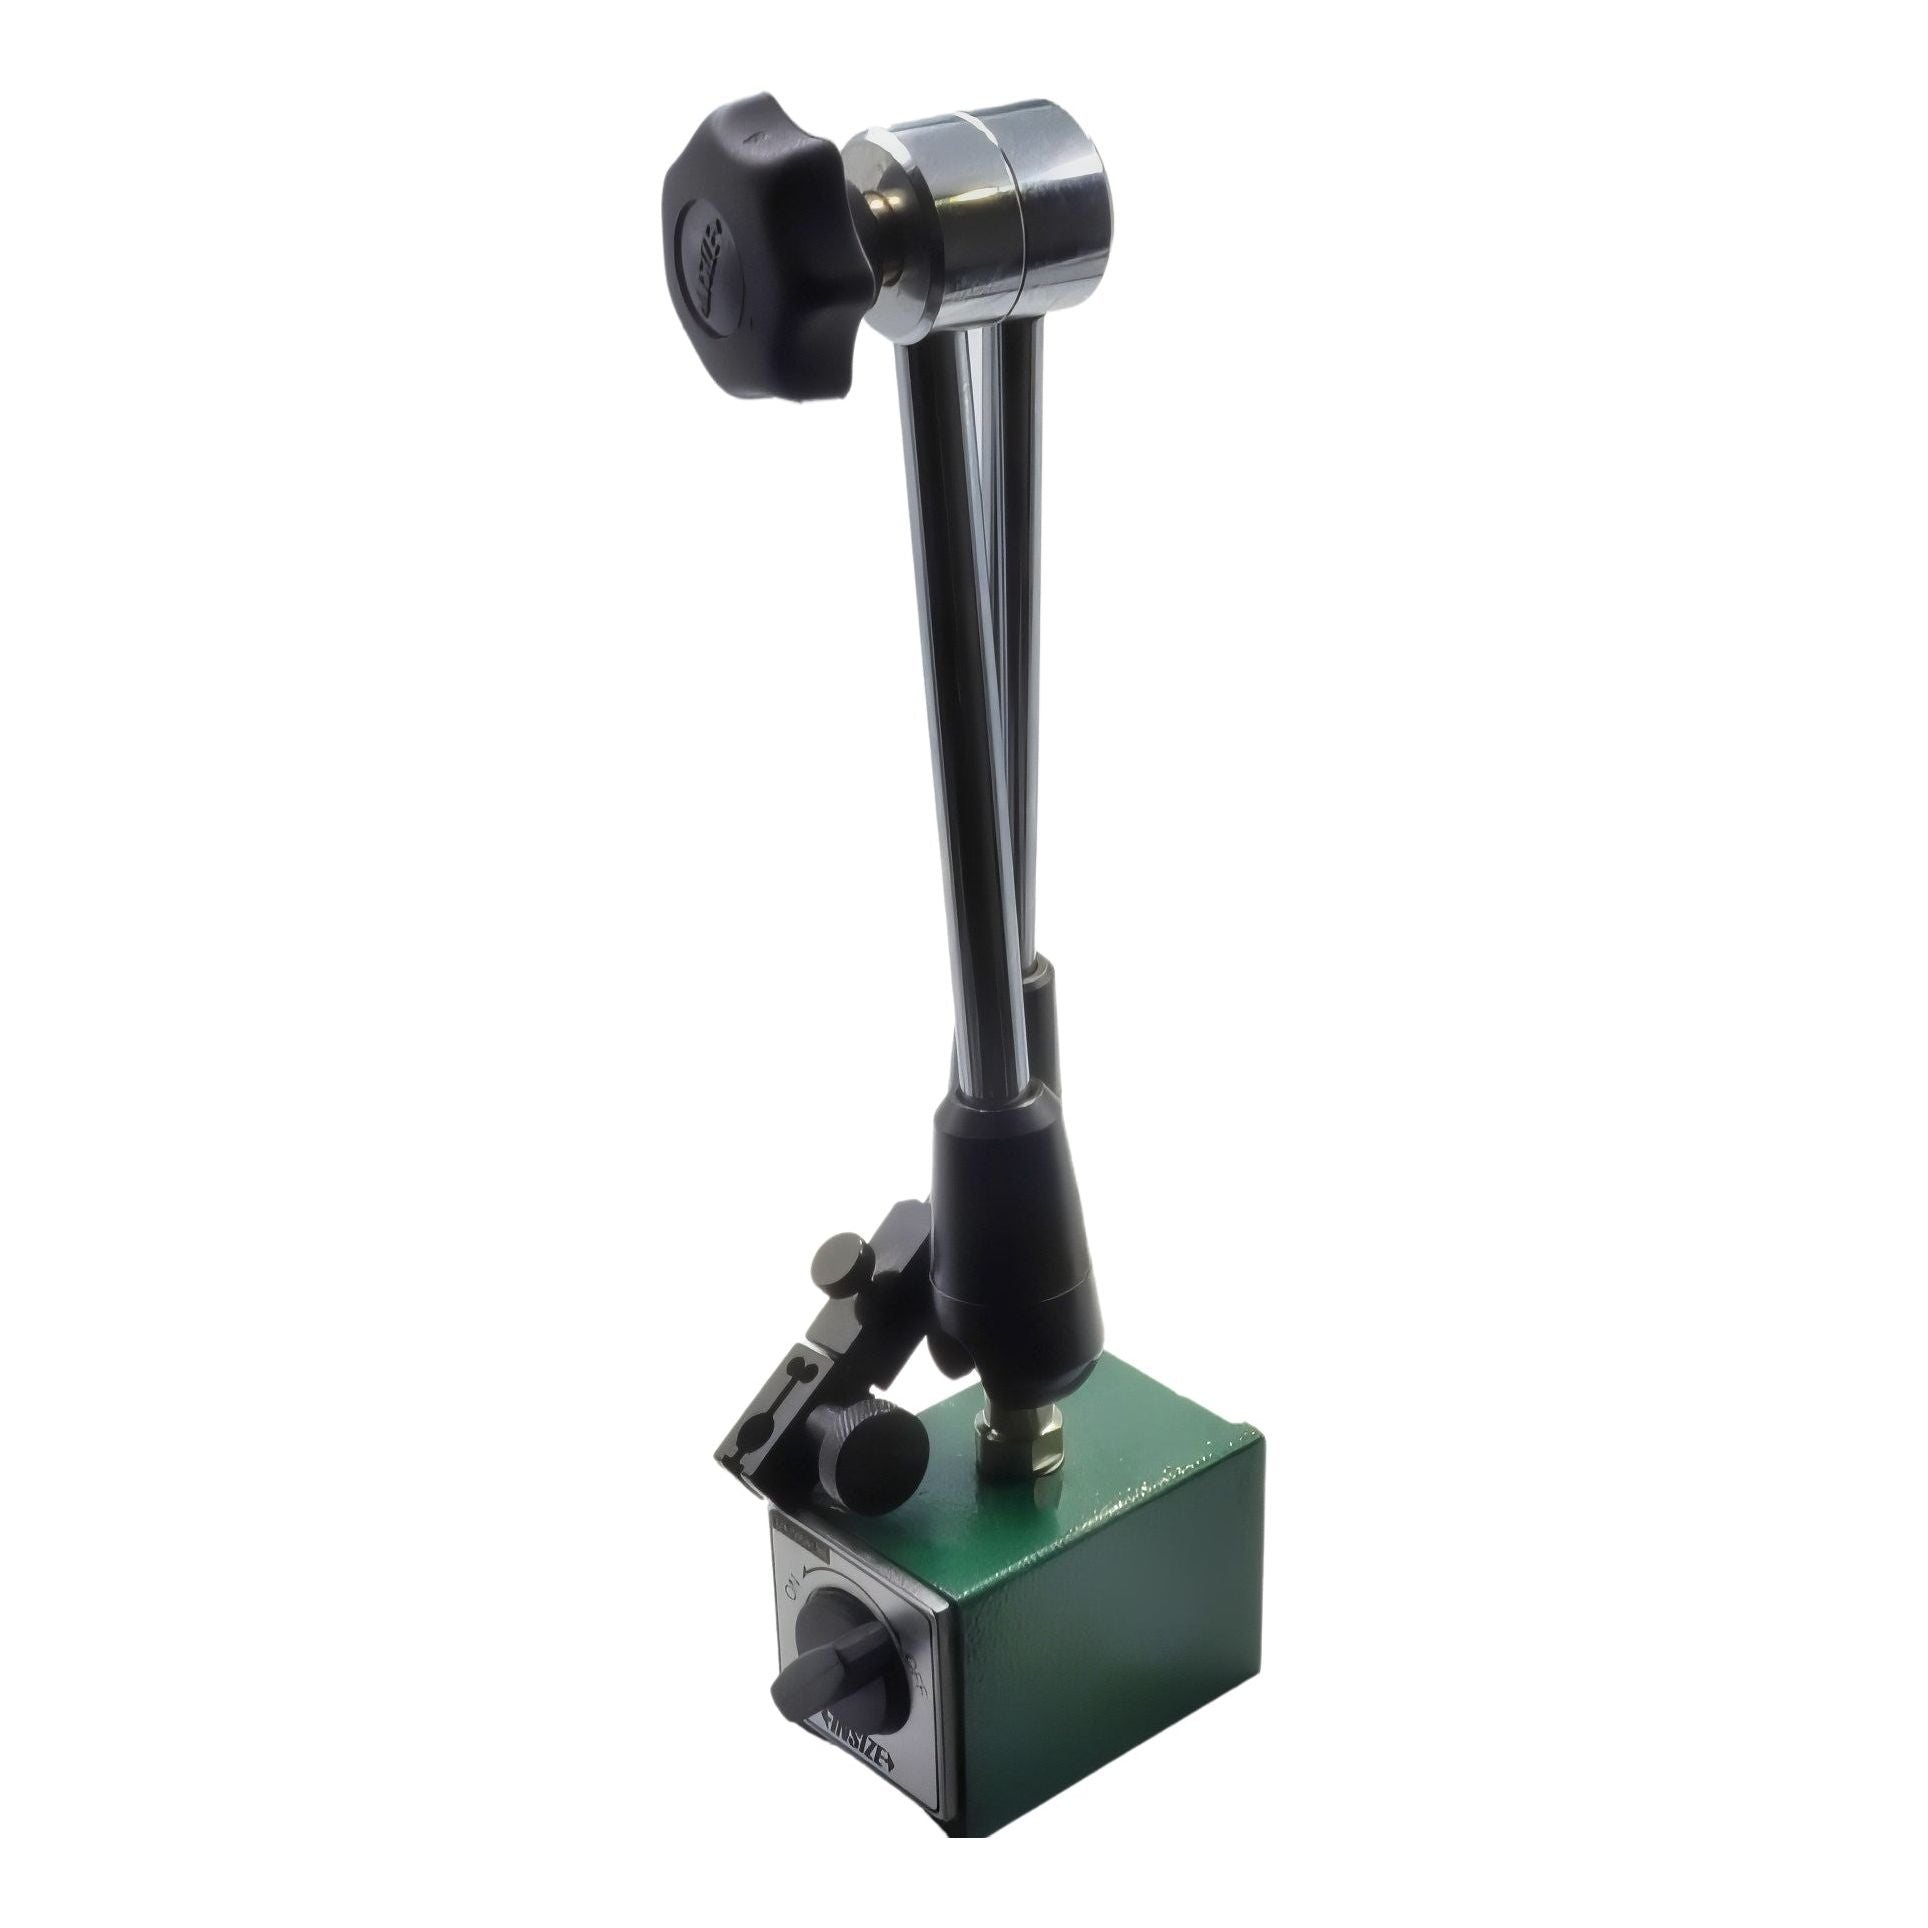 Insize Mechanical Lock Magnetic Stand 100 kg Force Series 6210-100